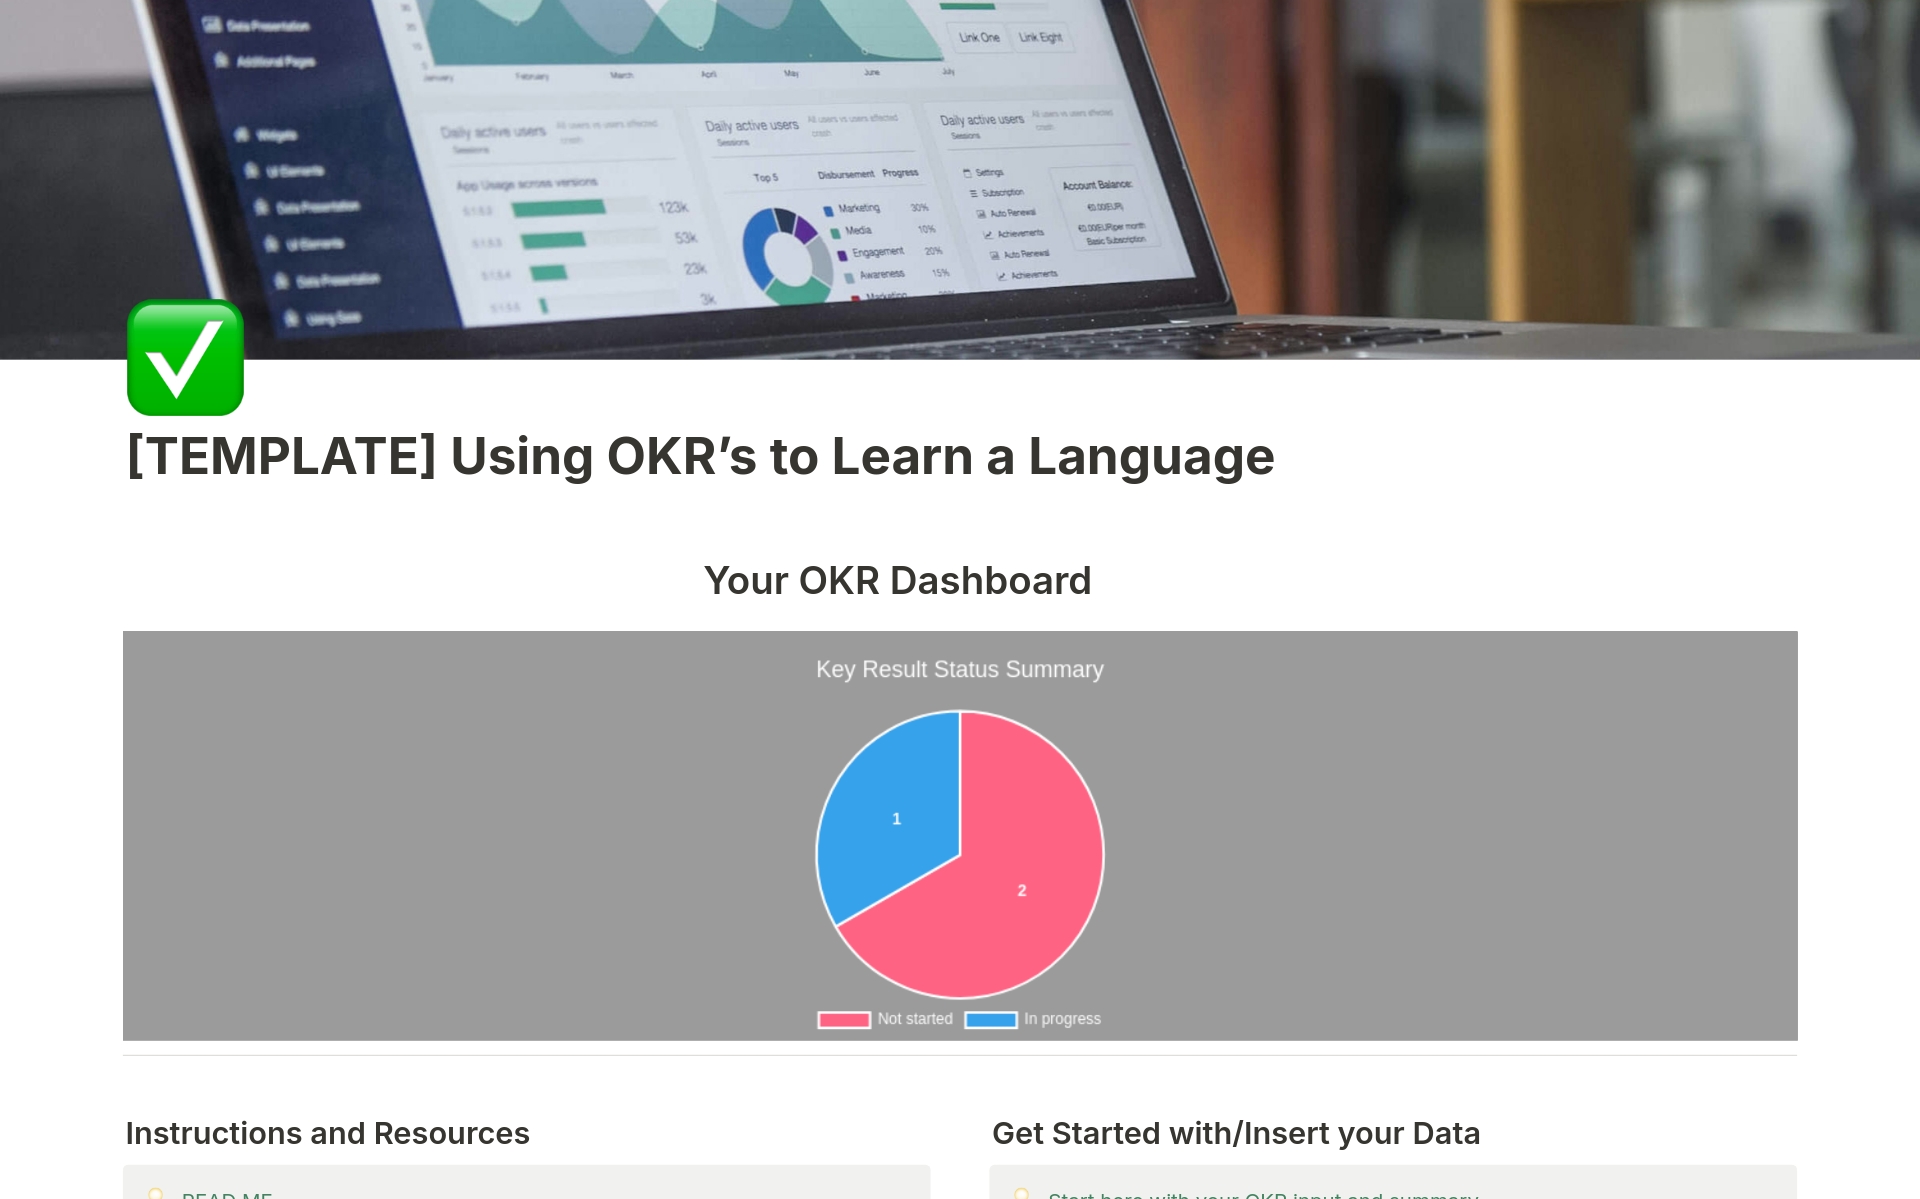 Manage, and achieve your Language Learning Goals through using Objectives and Key Results (OKR's). 